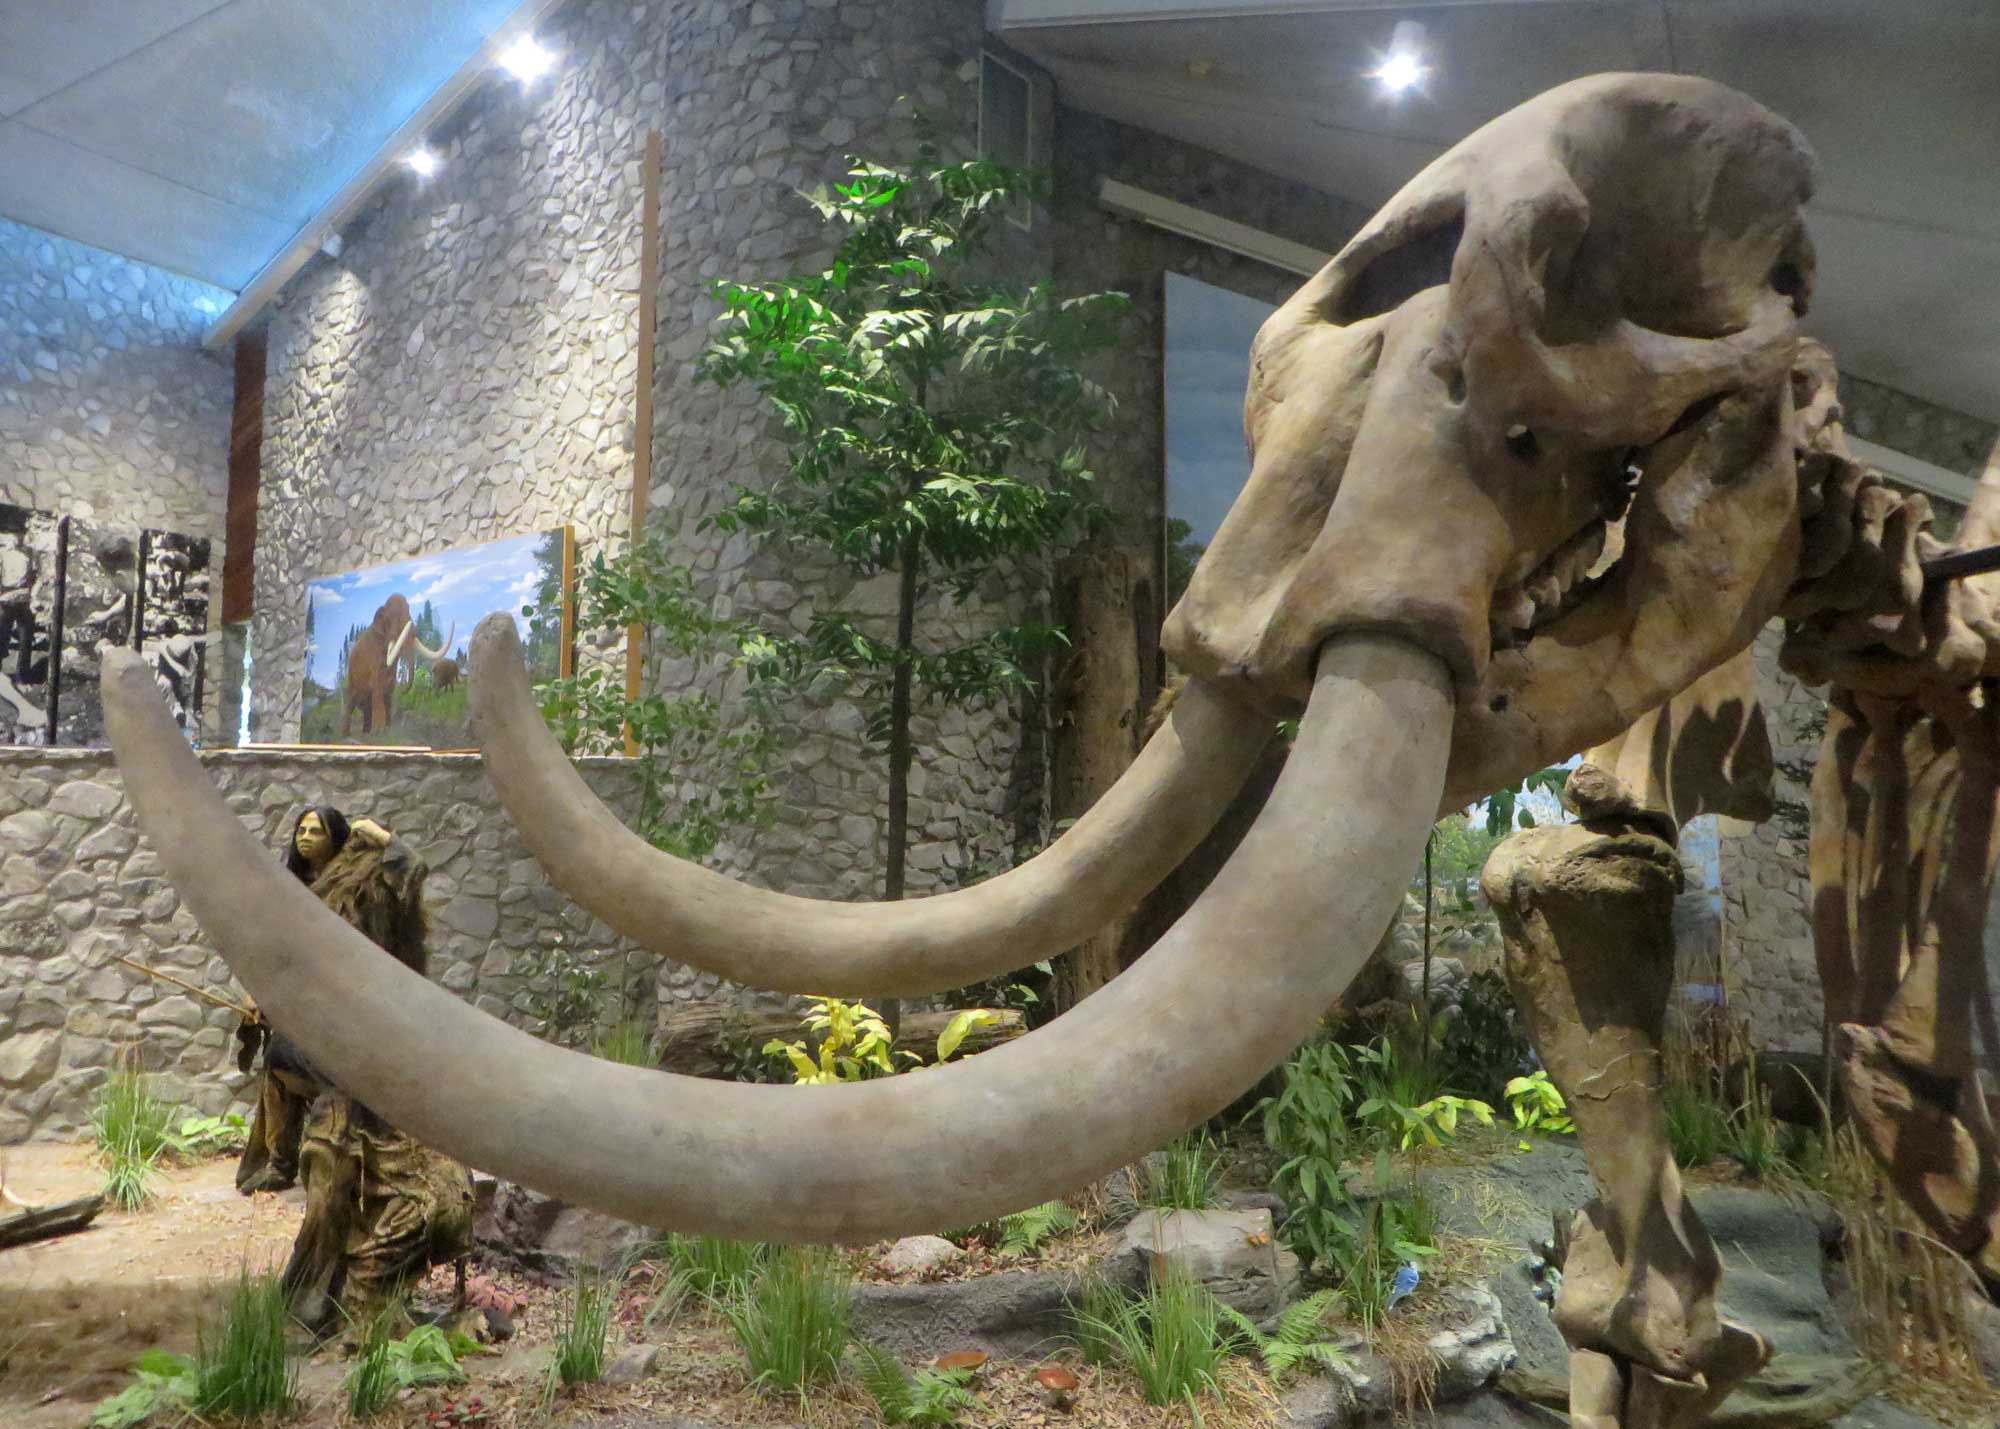 Photograph of exhibits at the Mastodon State Historic Site in Missouri with the skull of a mounted mastodon skeleton in the foreground.